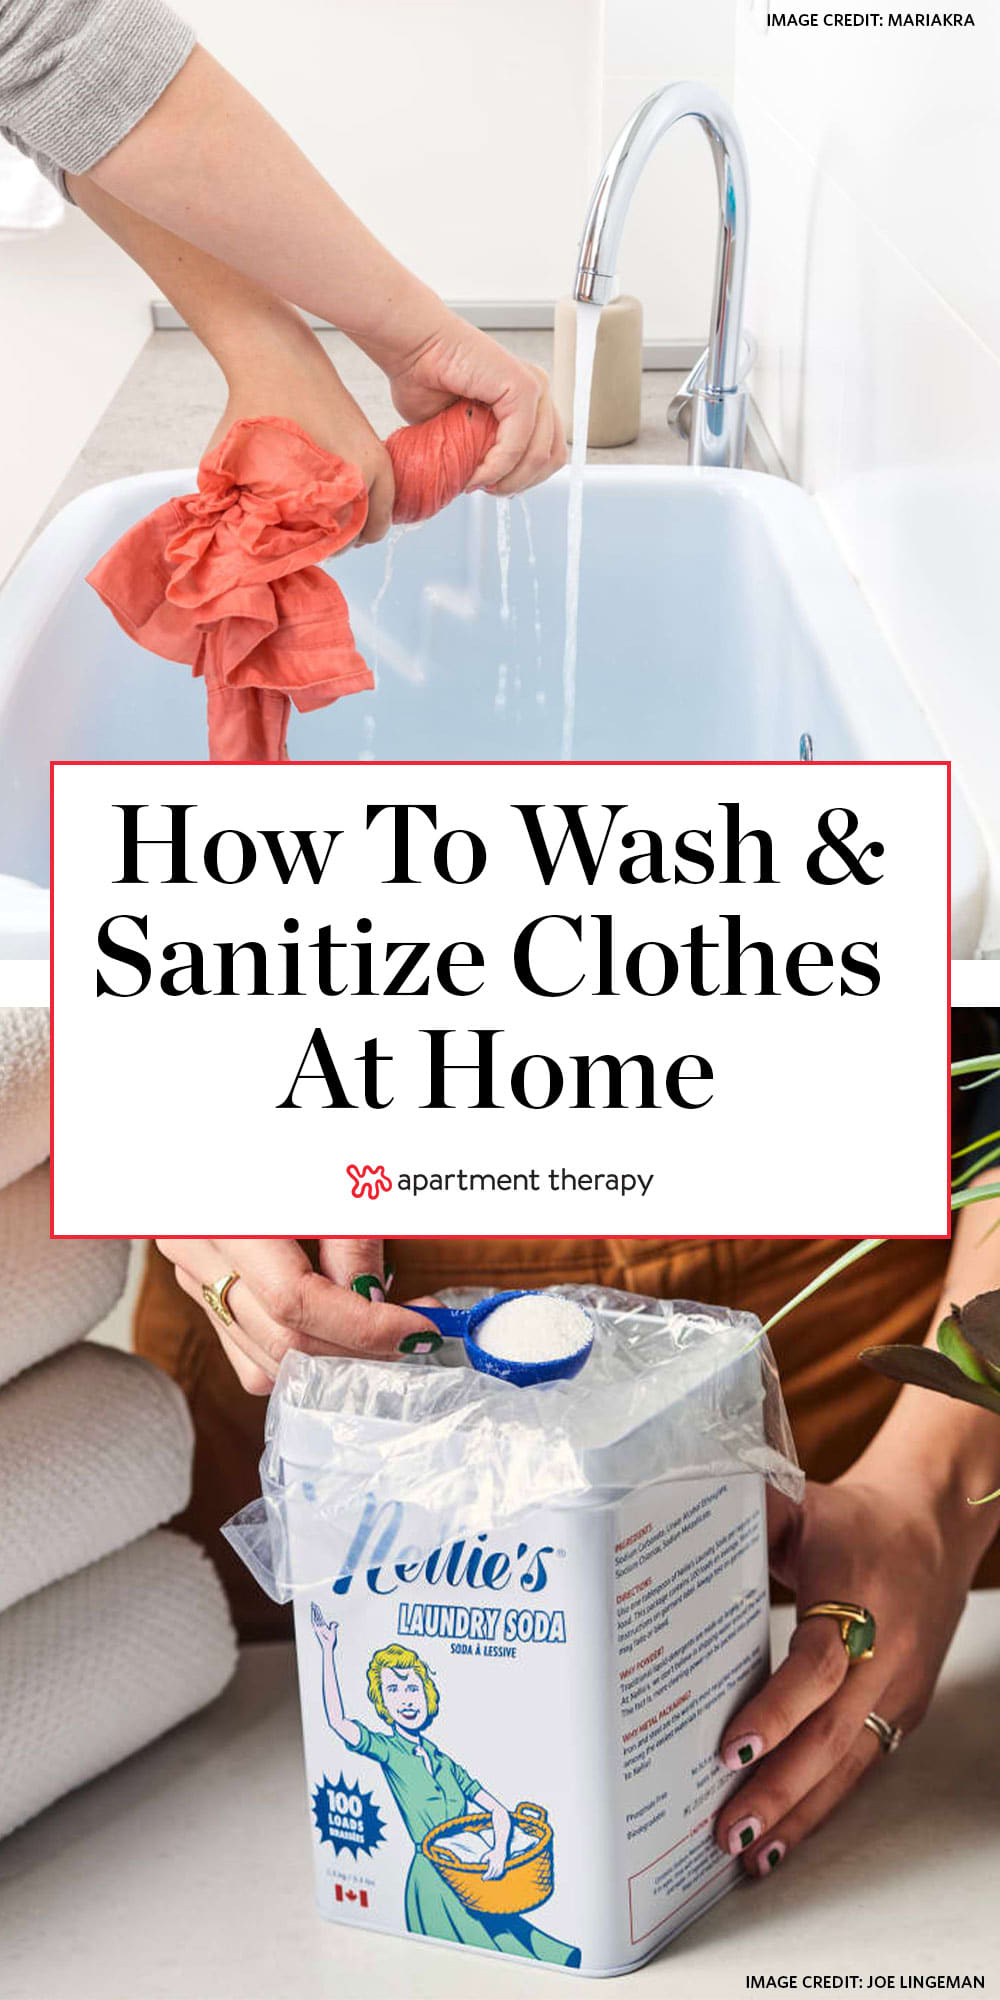 How to Handwash Clothes the Right Way?